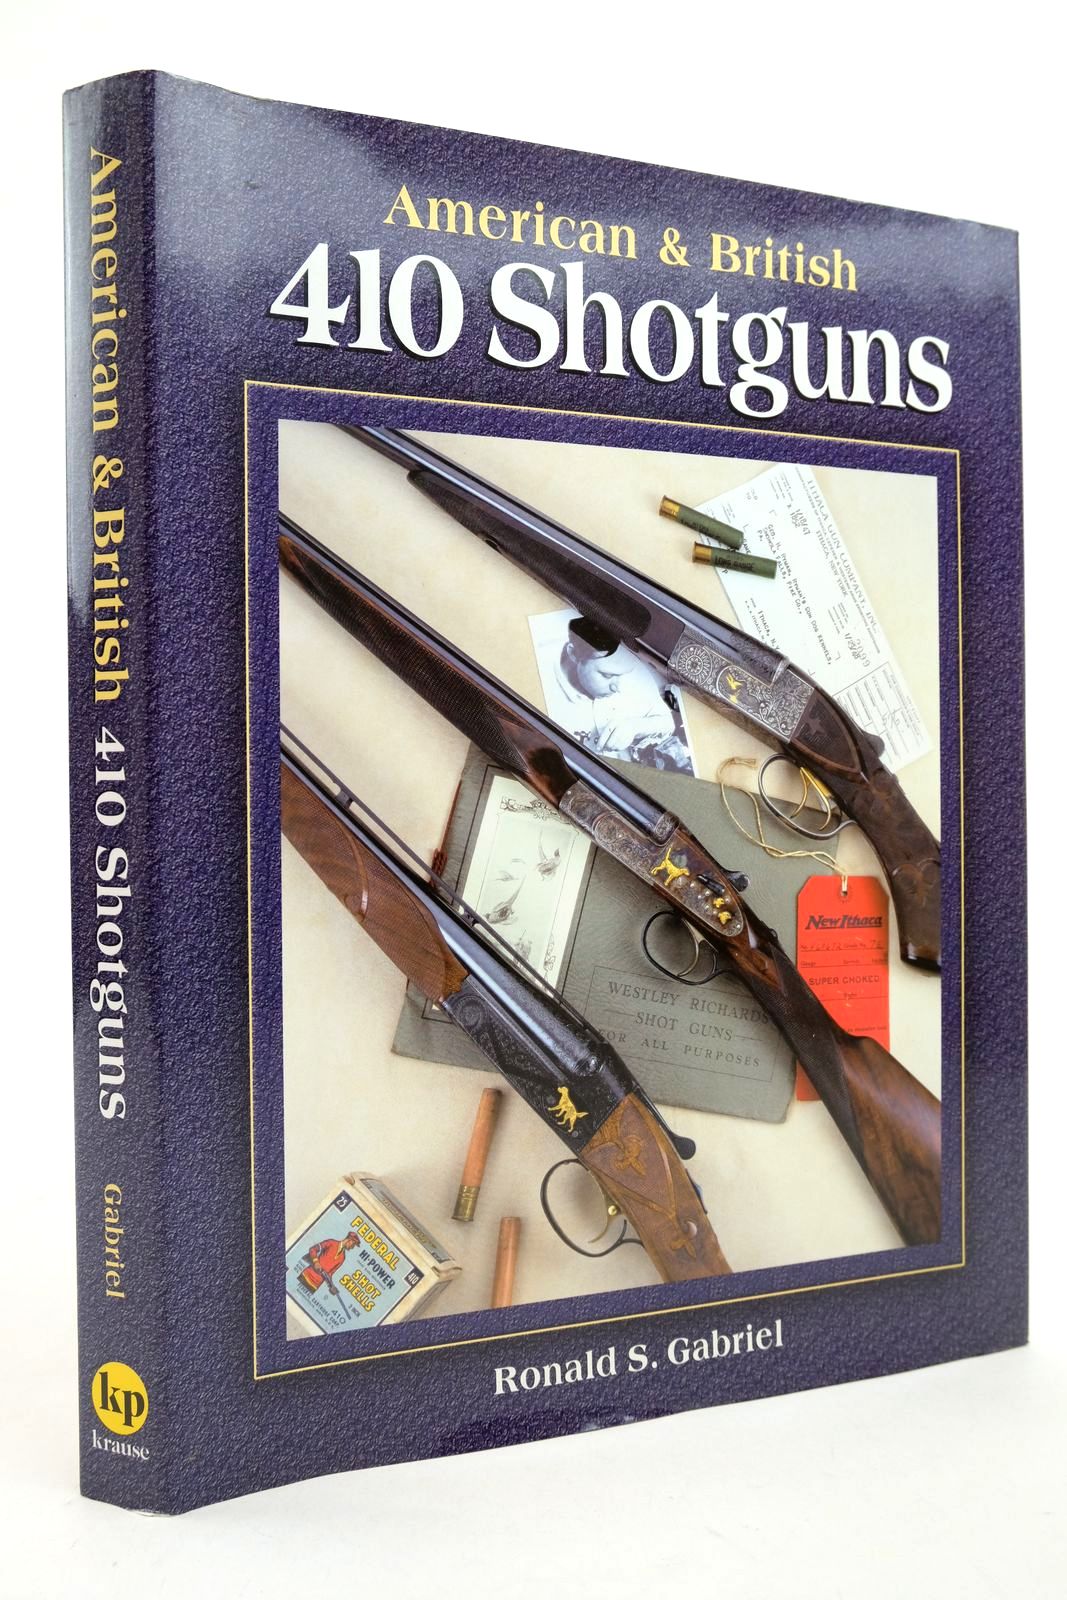 Photo of AMERICAN &AMP; BRITISH 410 SHOTGUNS written by Gabriel, Ronald S. published by Krause Publications (STOCK CODE: 2140680)  for sale by Stella & Rose's Books